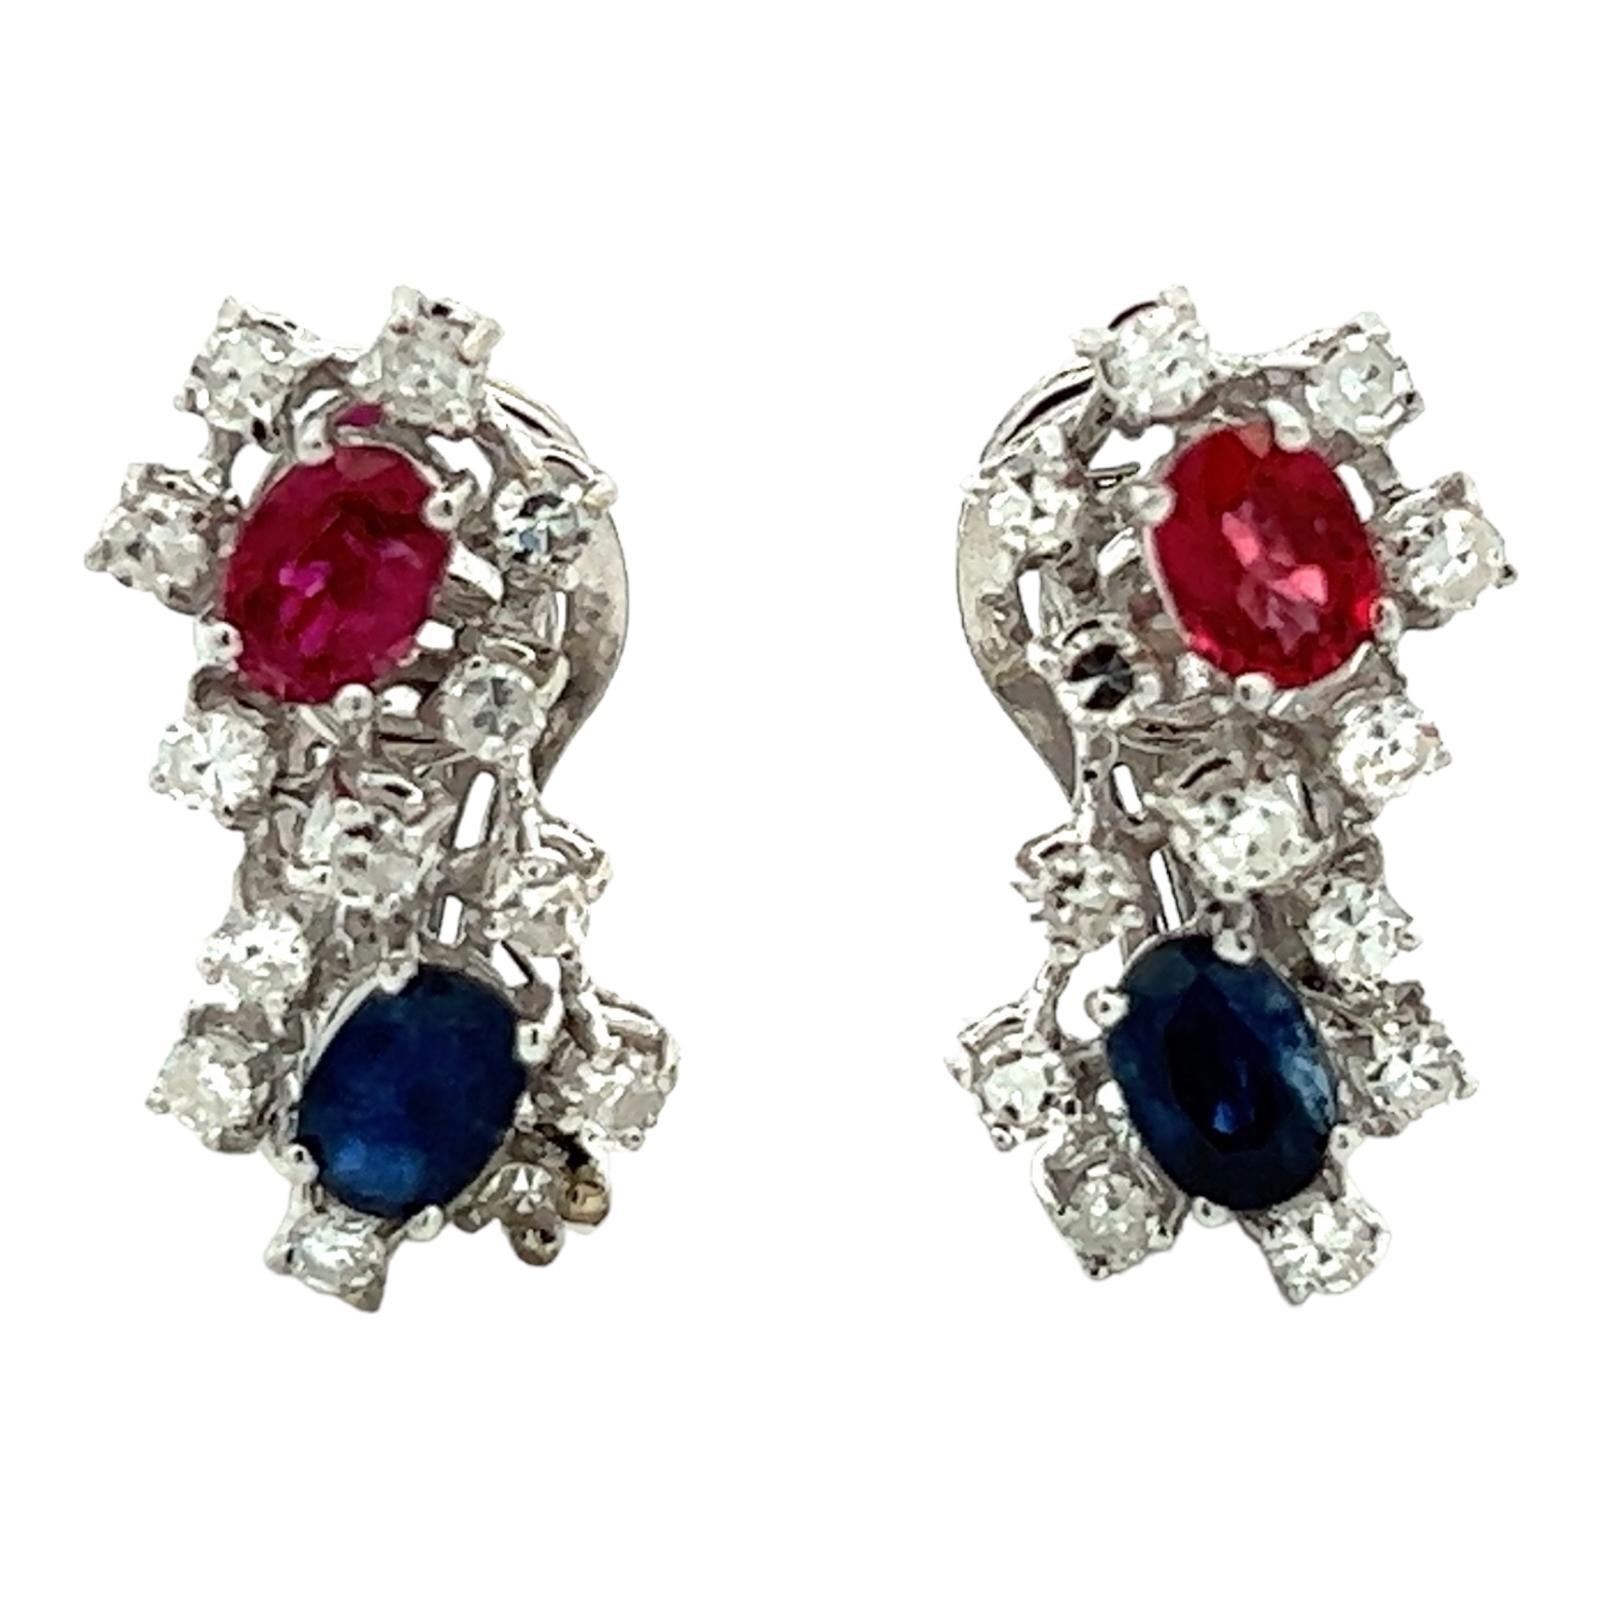 Diamond, sapphire, and ruby drop earrings crafted in 18 karat white gold. The earrings feature 2 oval blue sapphires weighing approximately .80 CTW, and two oval ruby gemstones weighing approximately .90 CTW. The gemstones are surrounded by 20